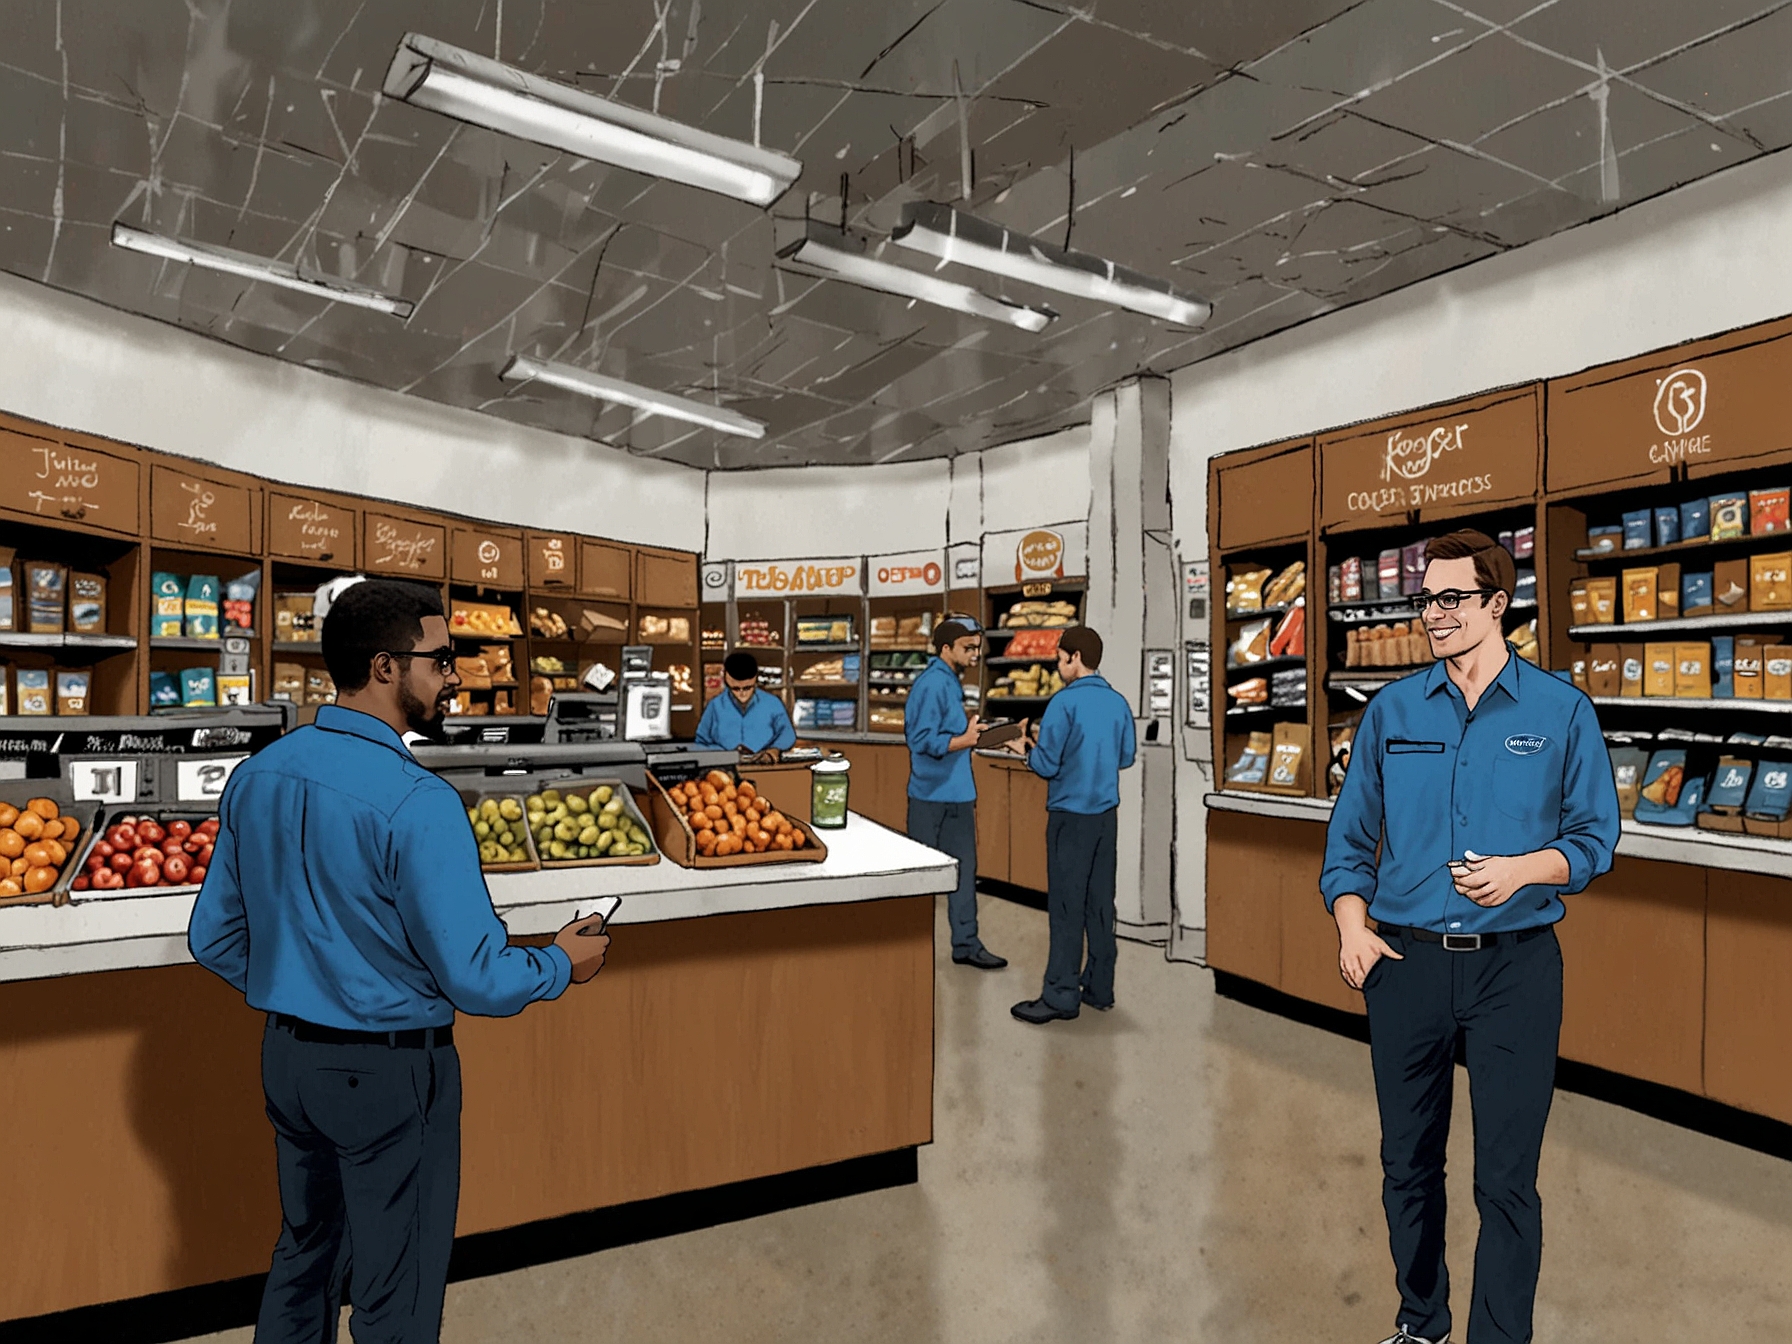 An illustration of Kroger's digital transformation initiatives, including enhanced e-commerce capabilities, new delivery options, and predictive analytics, demonstrating the company's focus on innovation and customer-centric solutions.